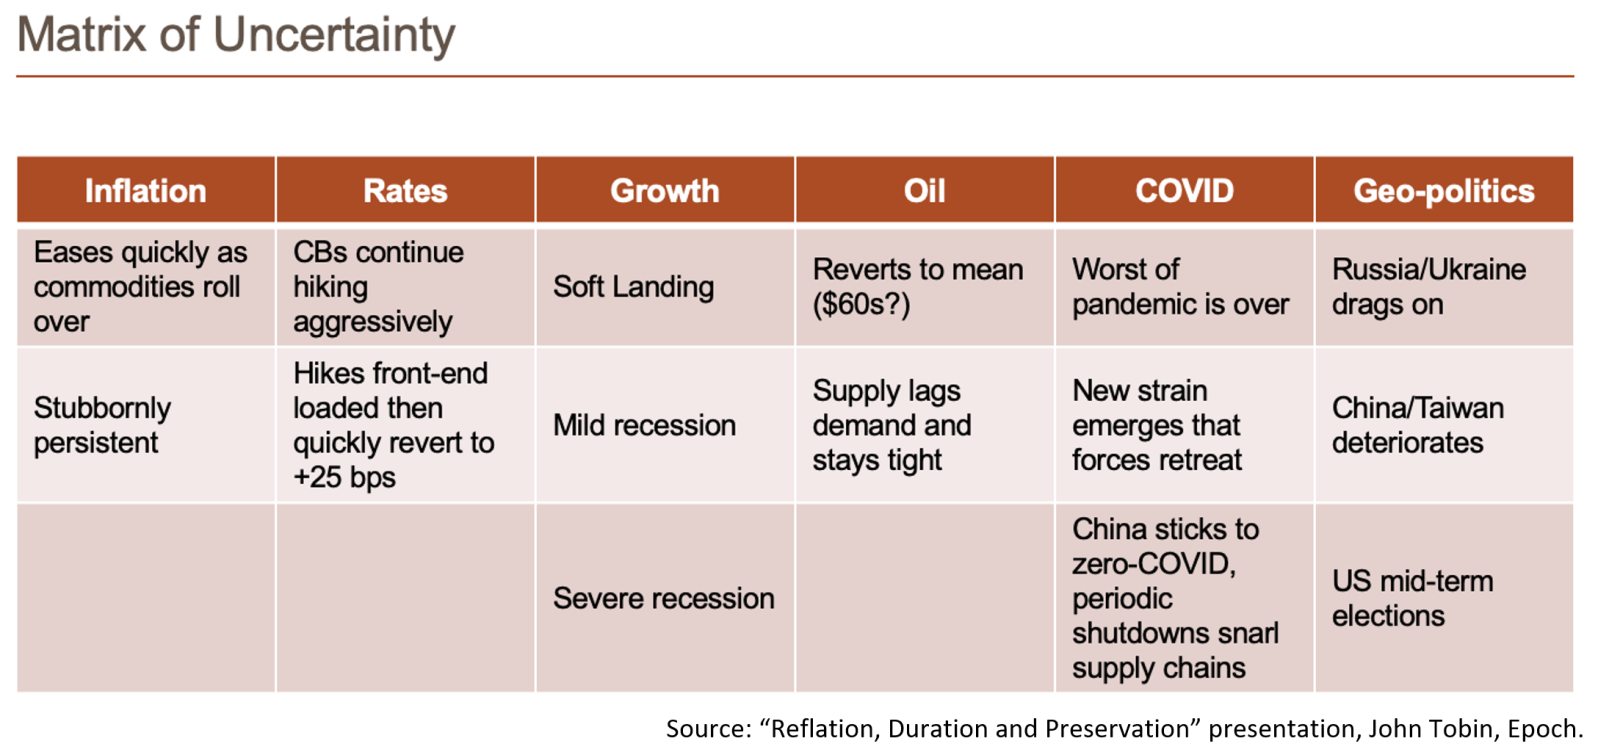 John Tobin's Matrix of Uncertainty showing connections among inflation, rates, growth, oil, Covid and Geo-politics